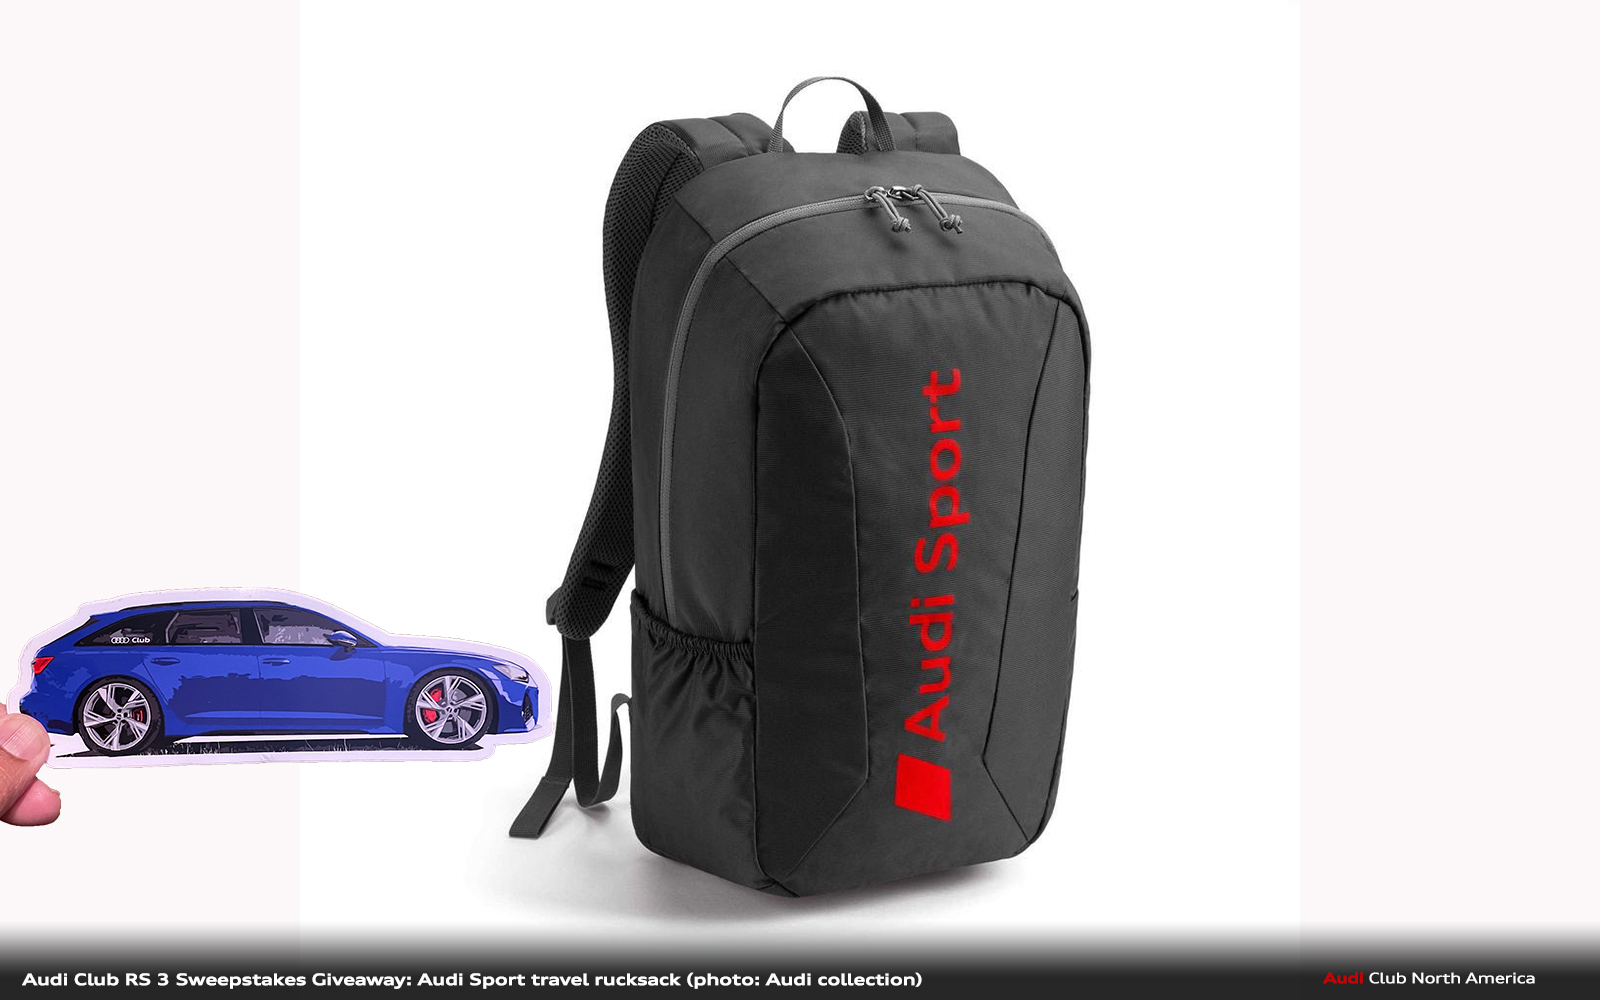 One Wins This Audi Club America North Rucksack Travel Everyone Sport - Tribute Gets RS an and Decal! Audi Audi 6